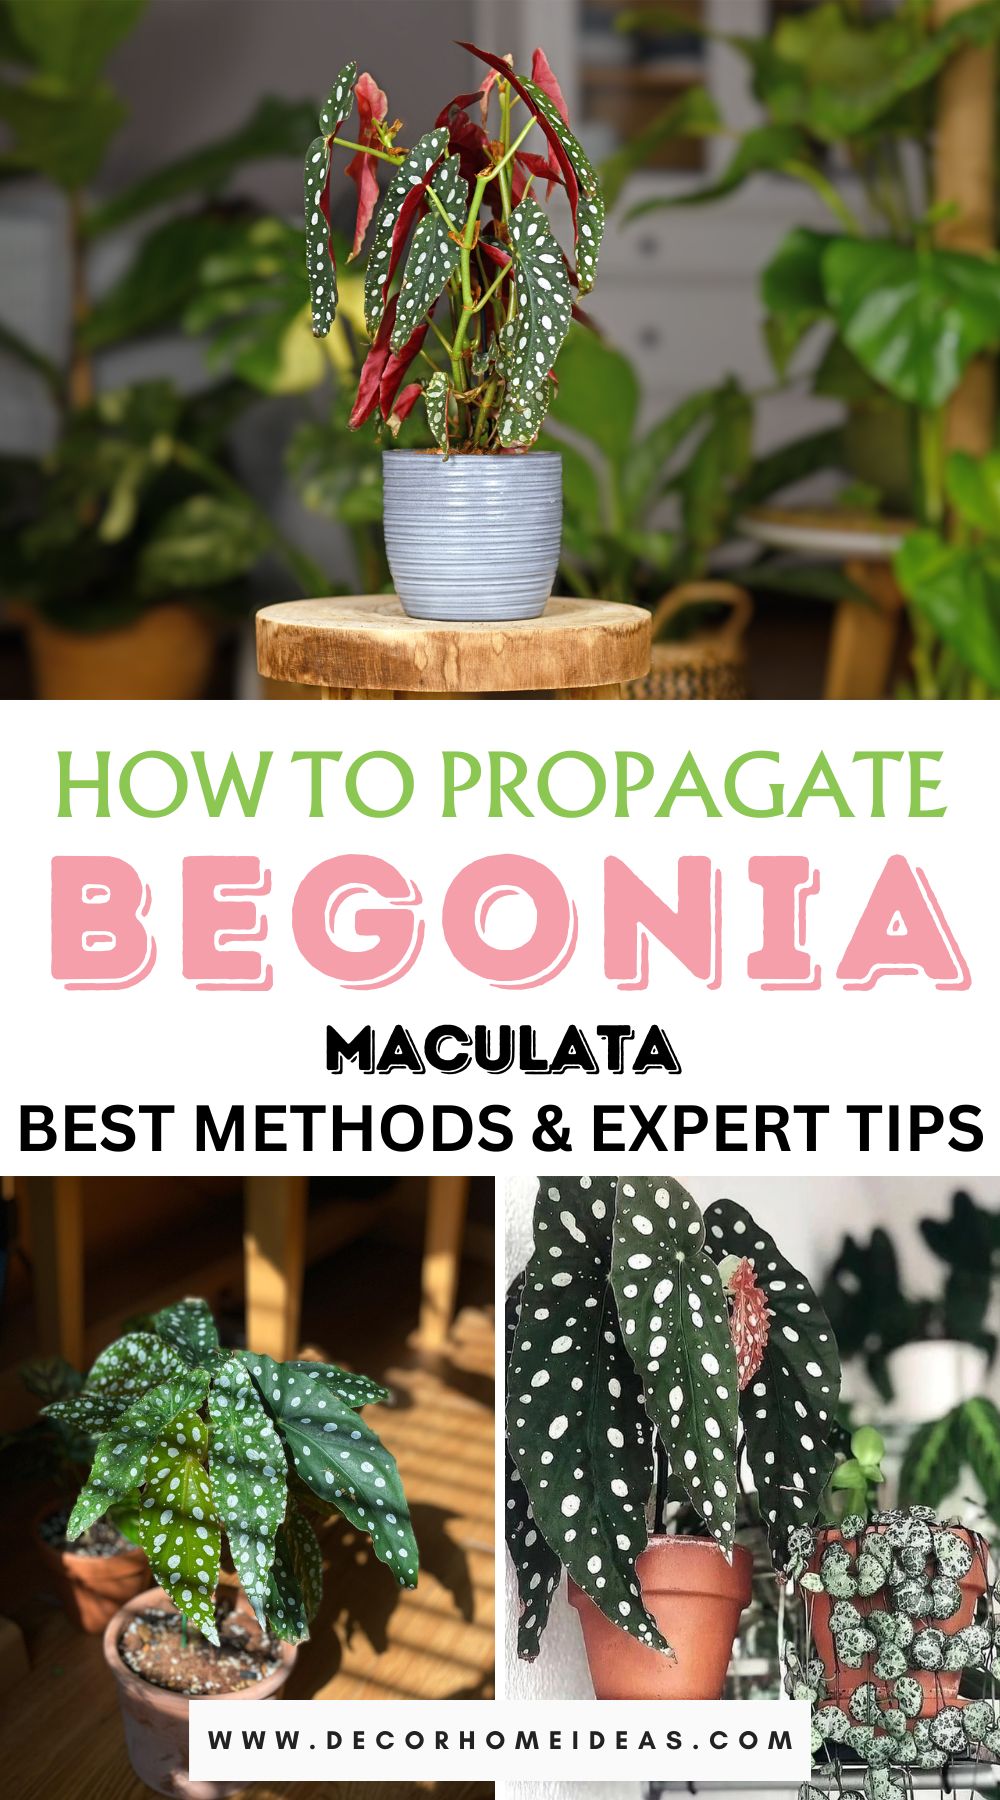 Unlock the secrets of propagating the striking Begonia Maculata with expert guidance. Learn the best techniques and tips for successful propagation, enabling you to expand your begonia collection with confidence.